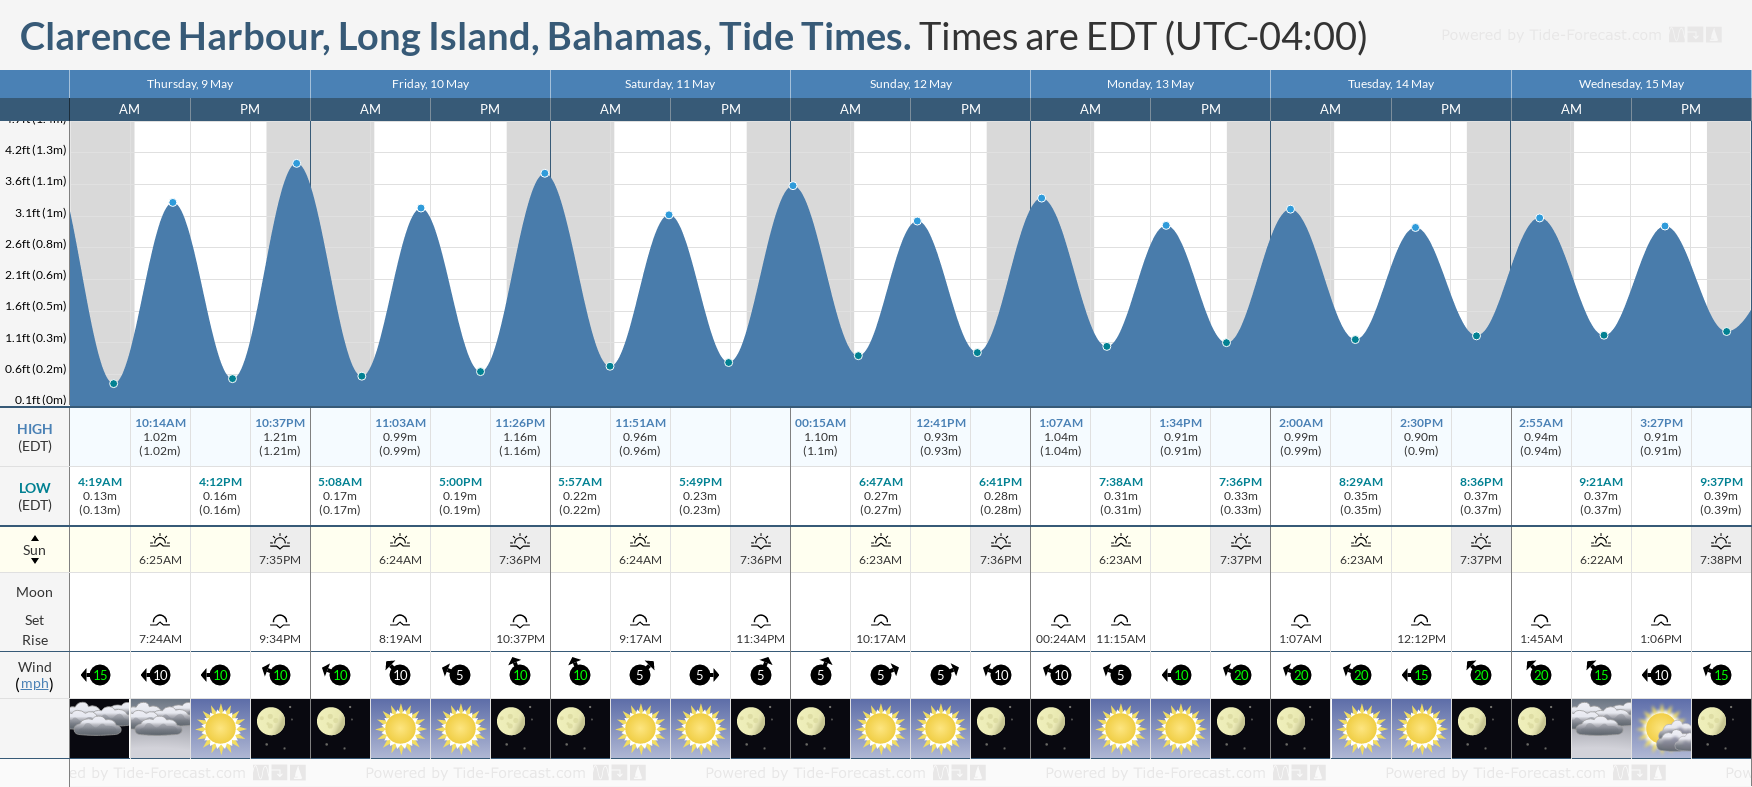 Clarence Harbour, Long Island, Bahamas Tide Chart including high and low tide tide times for the next 7 days